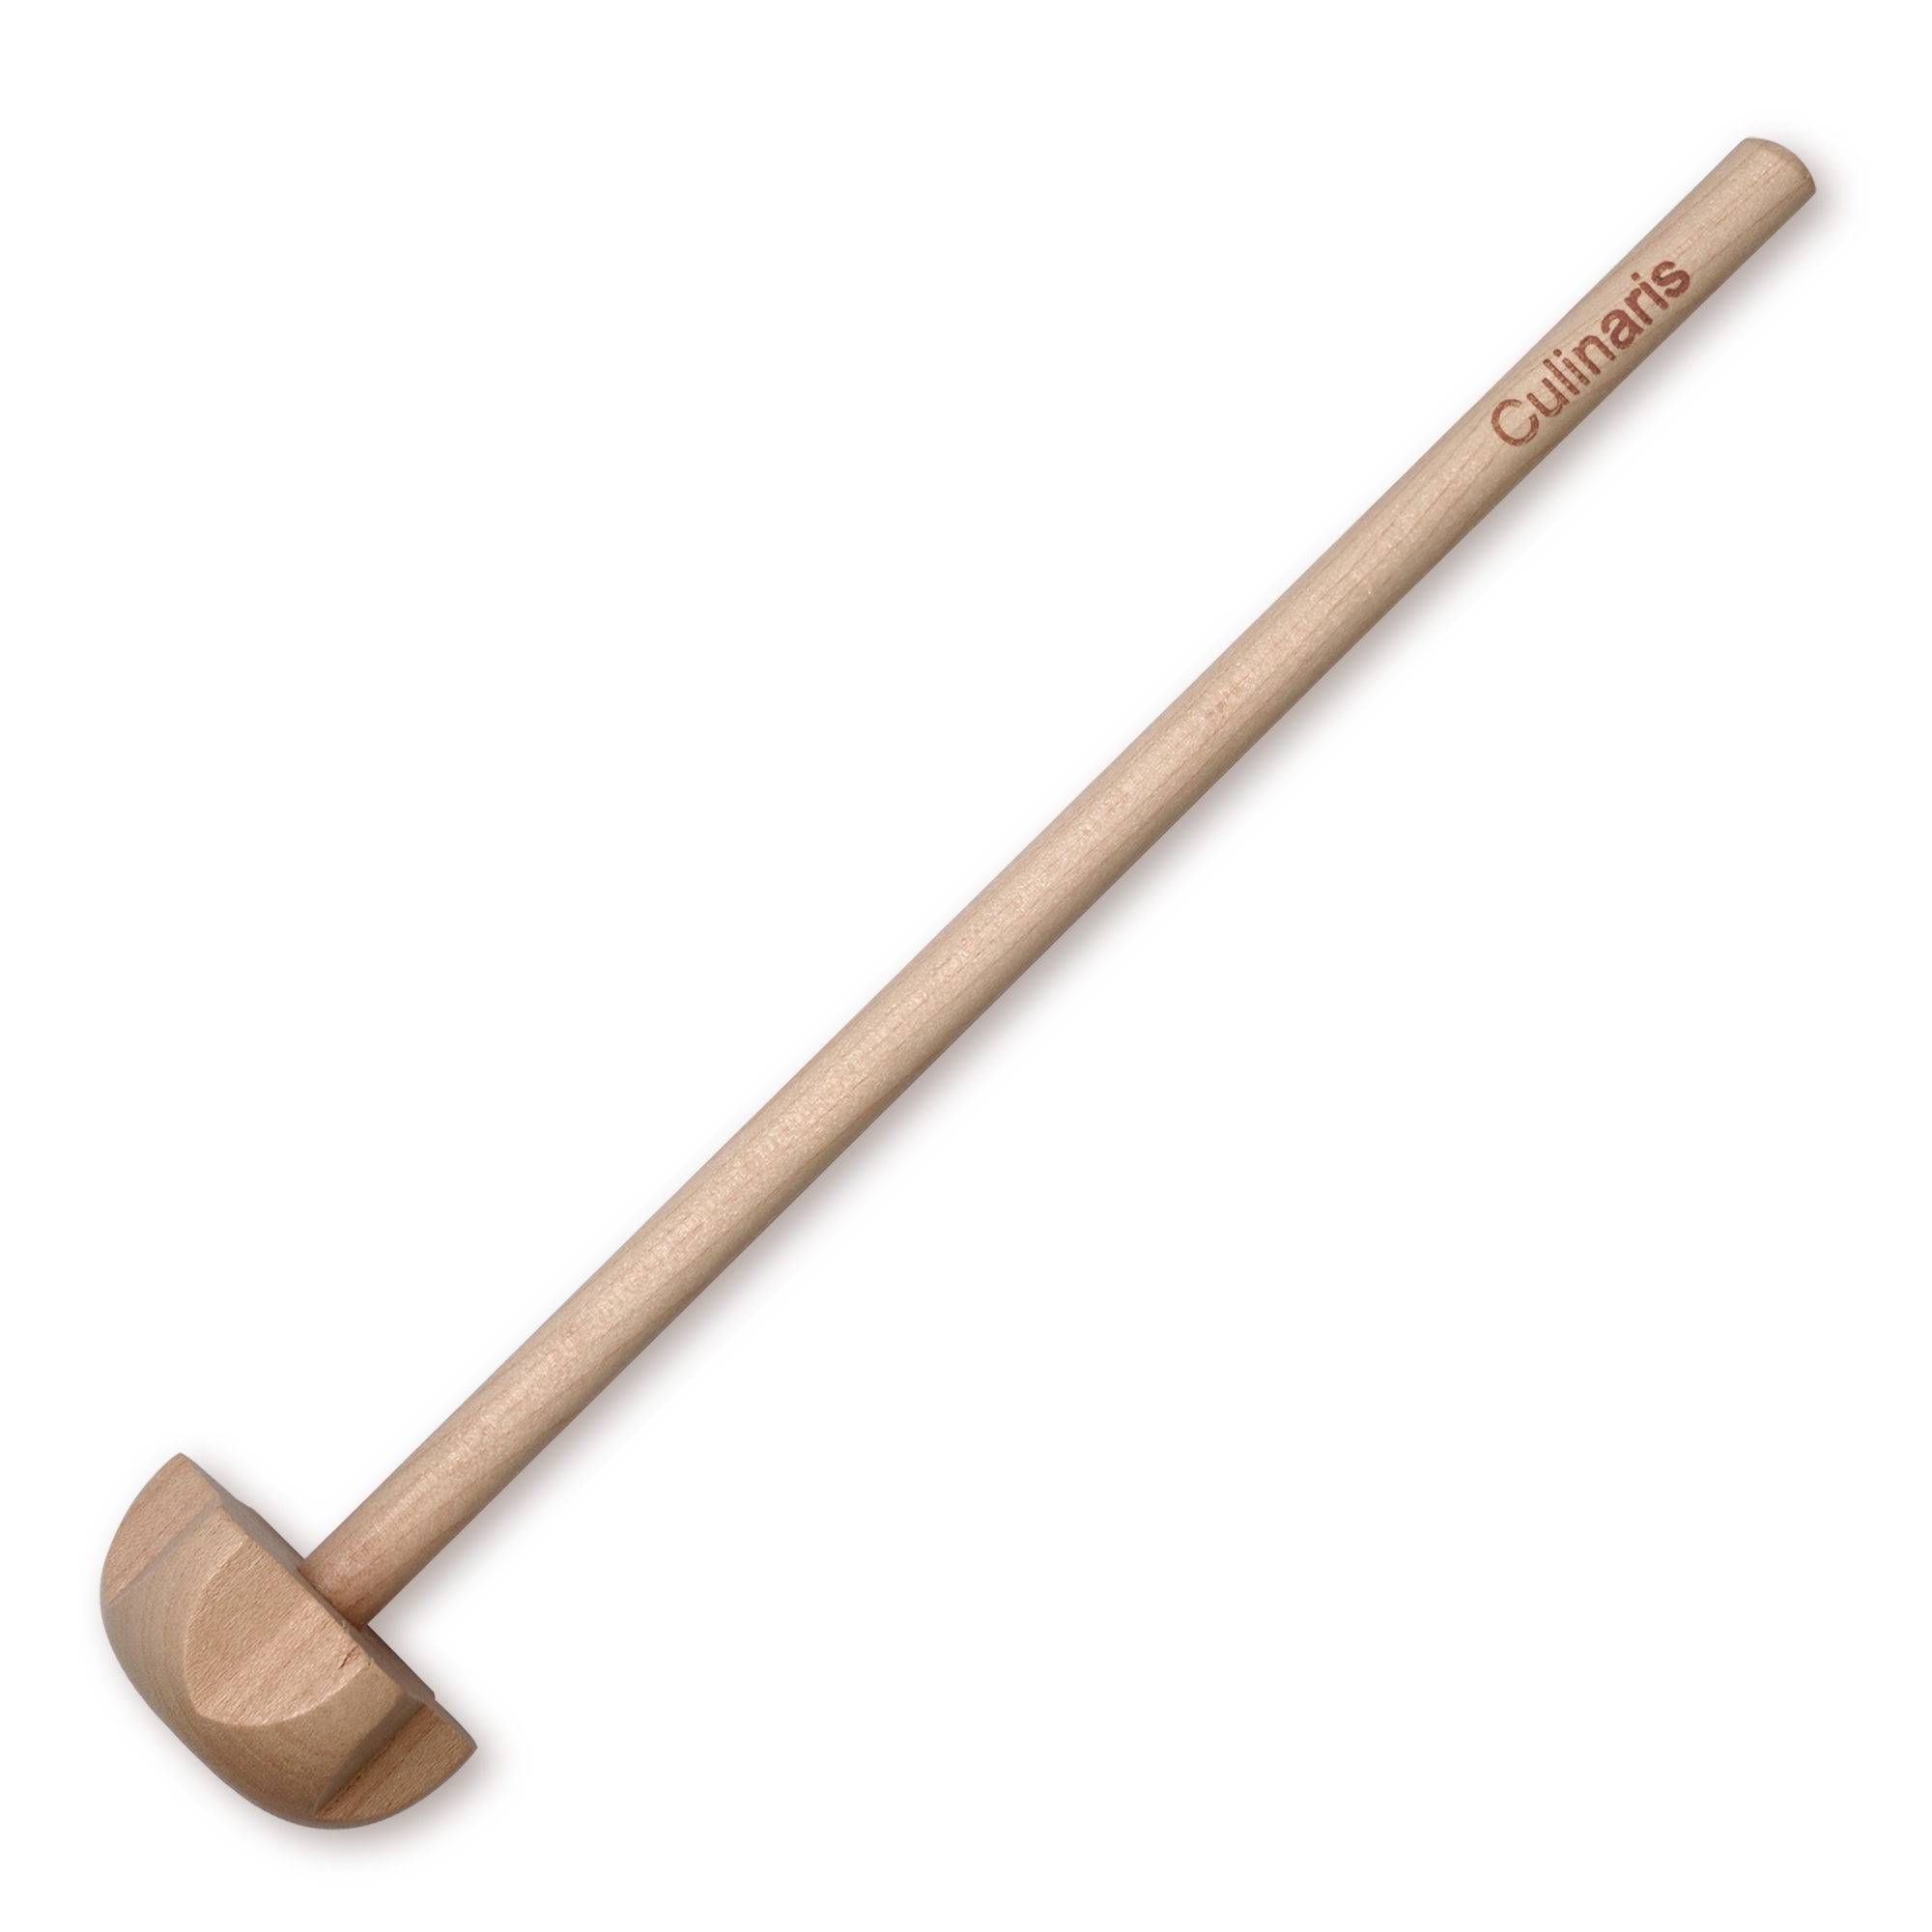 Culinaris - Maple wood whisk